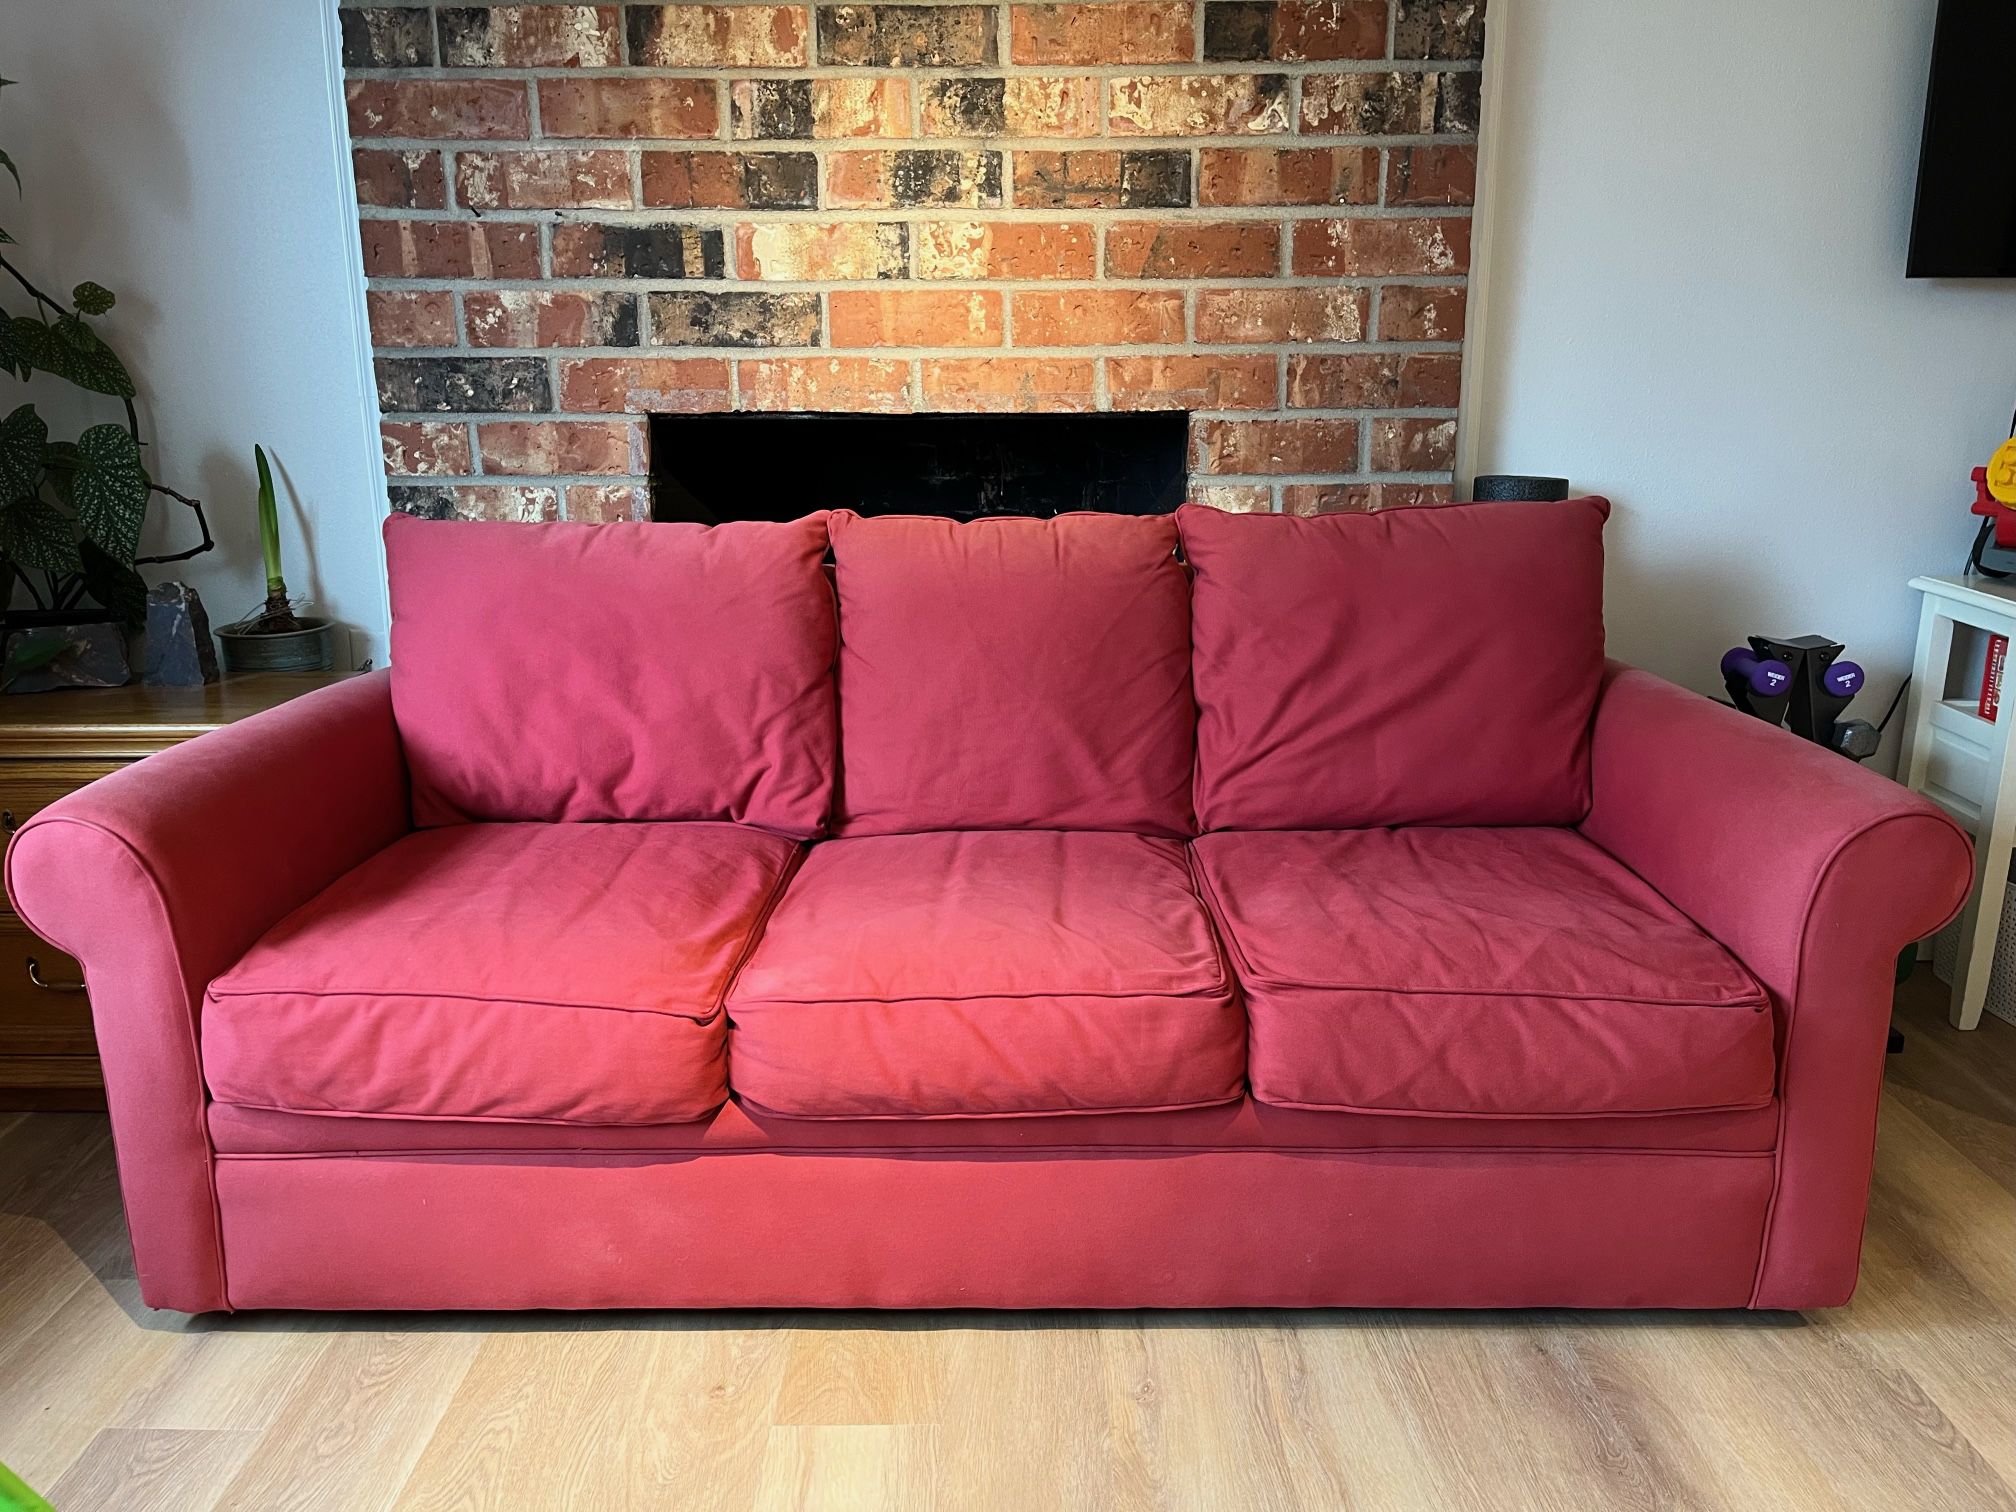 Free Red Couch 84” W x 32” H x 39” D